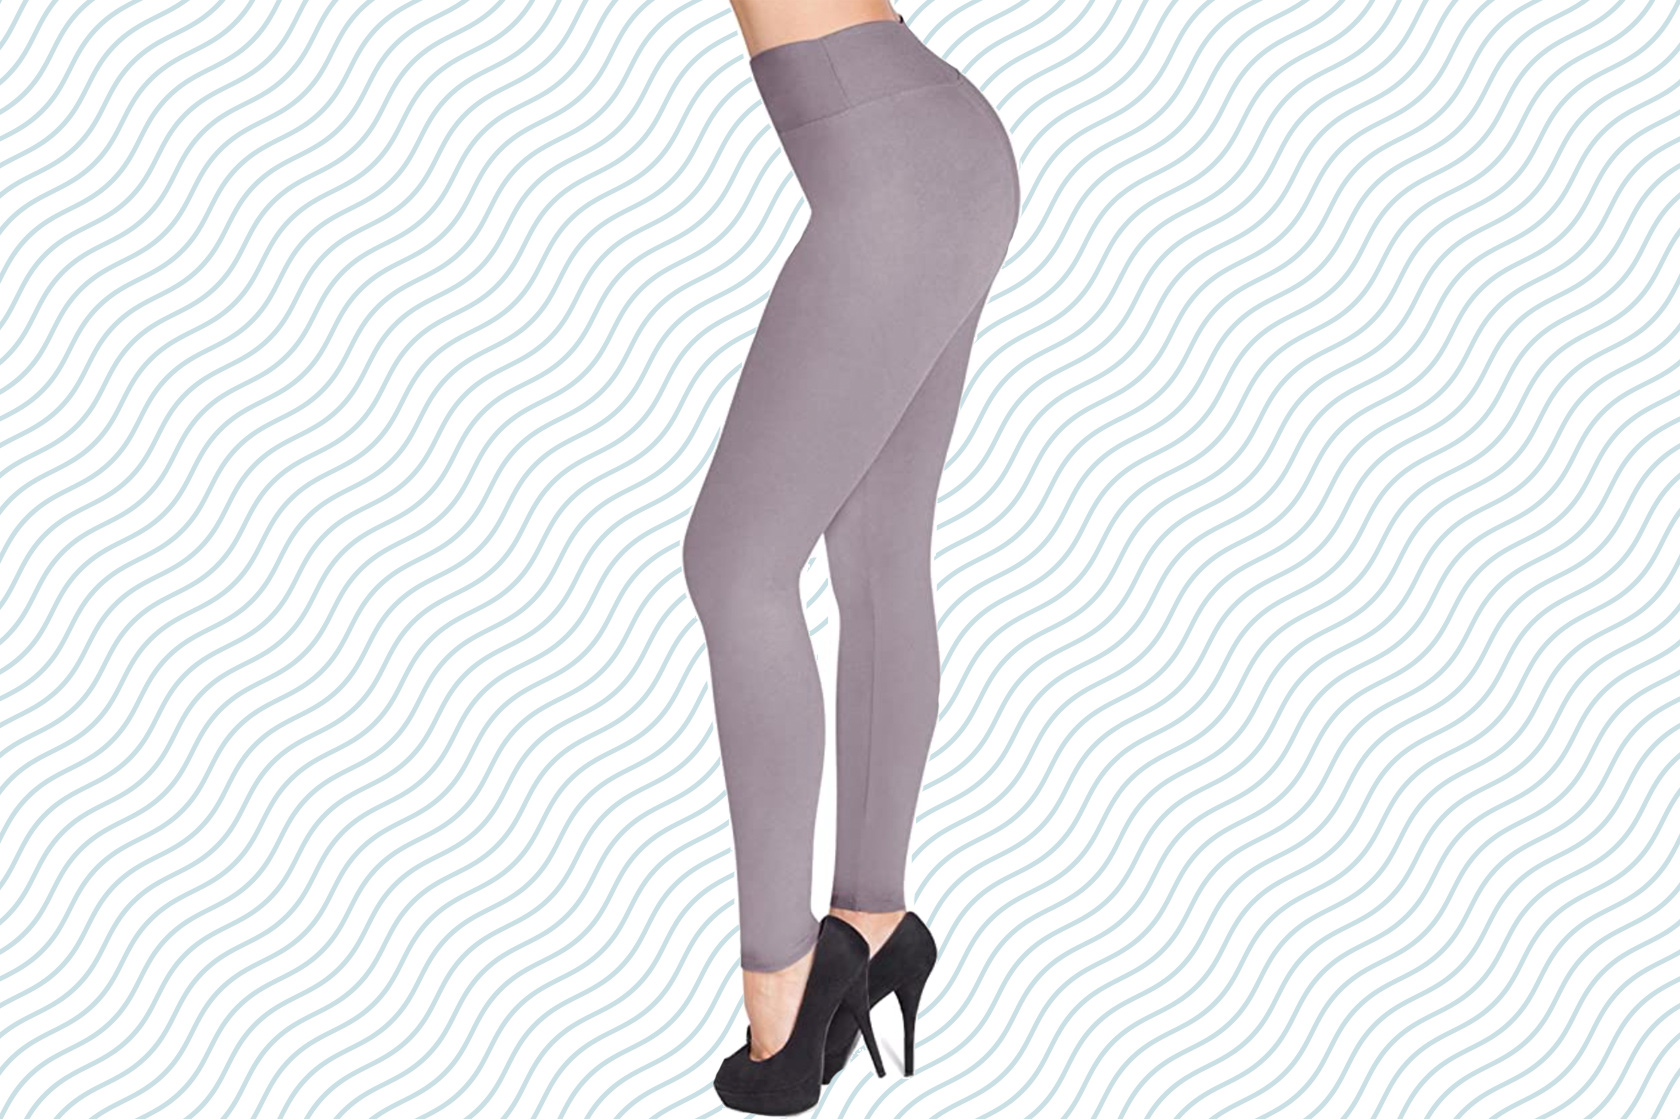 Get a pair of butter-soft leggings for $8 for Prime Day